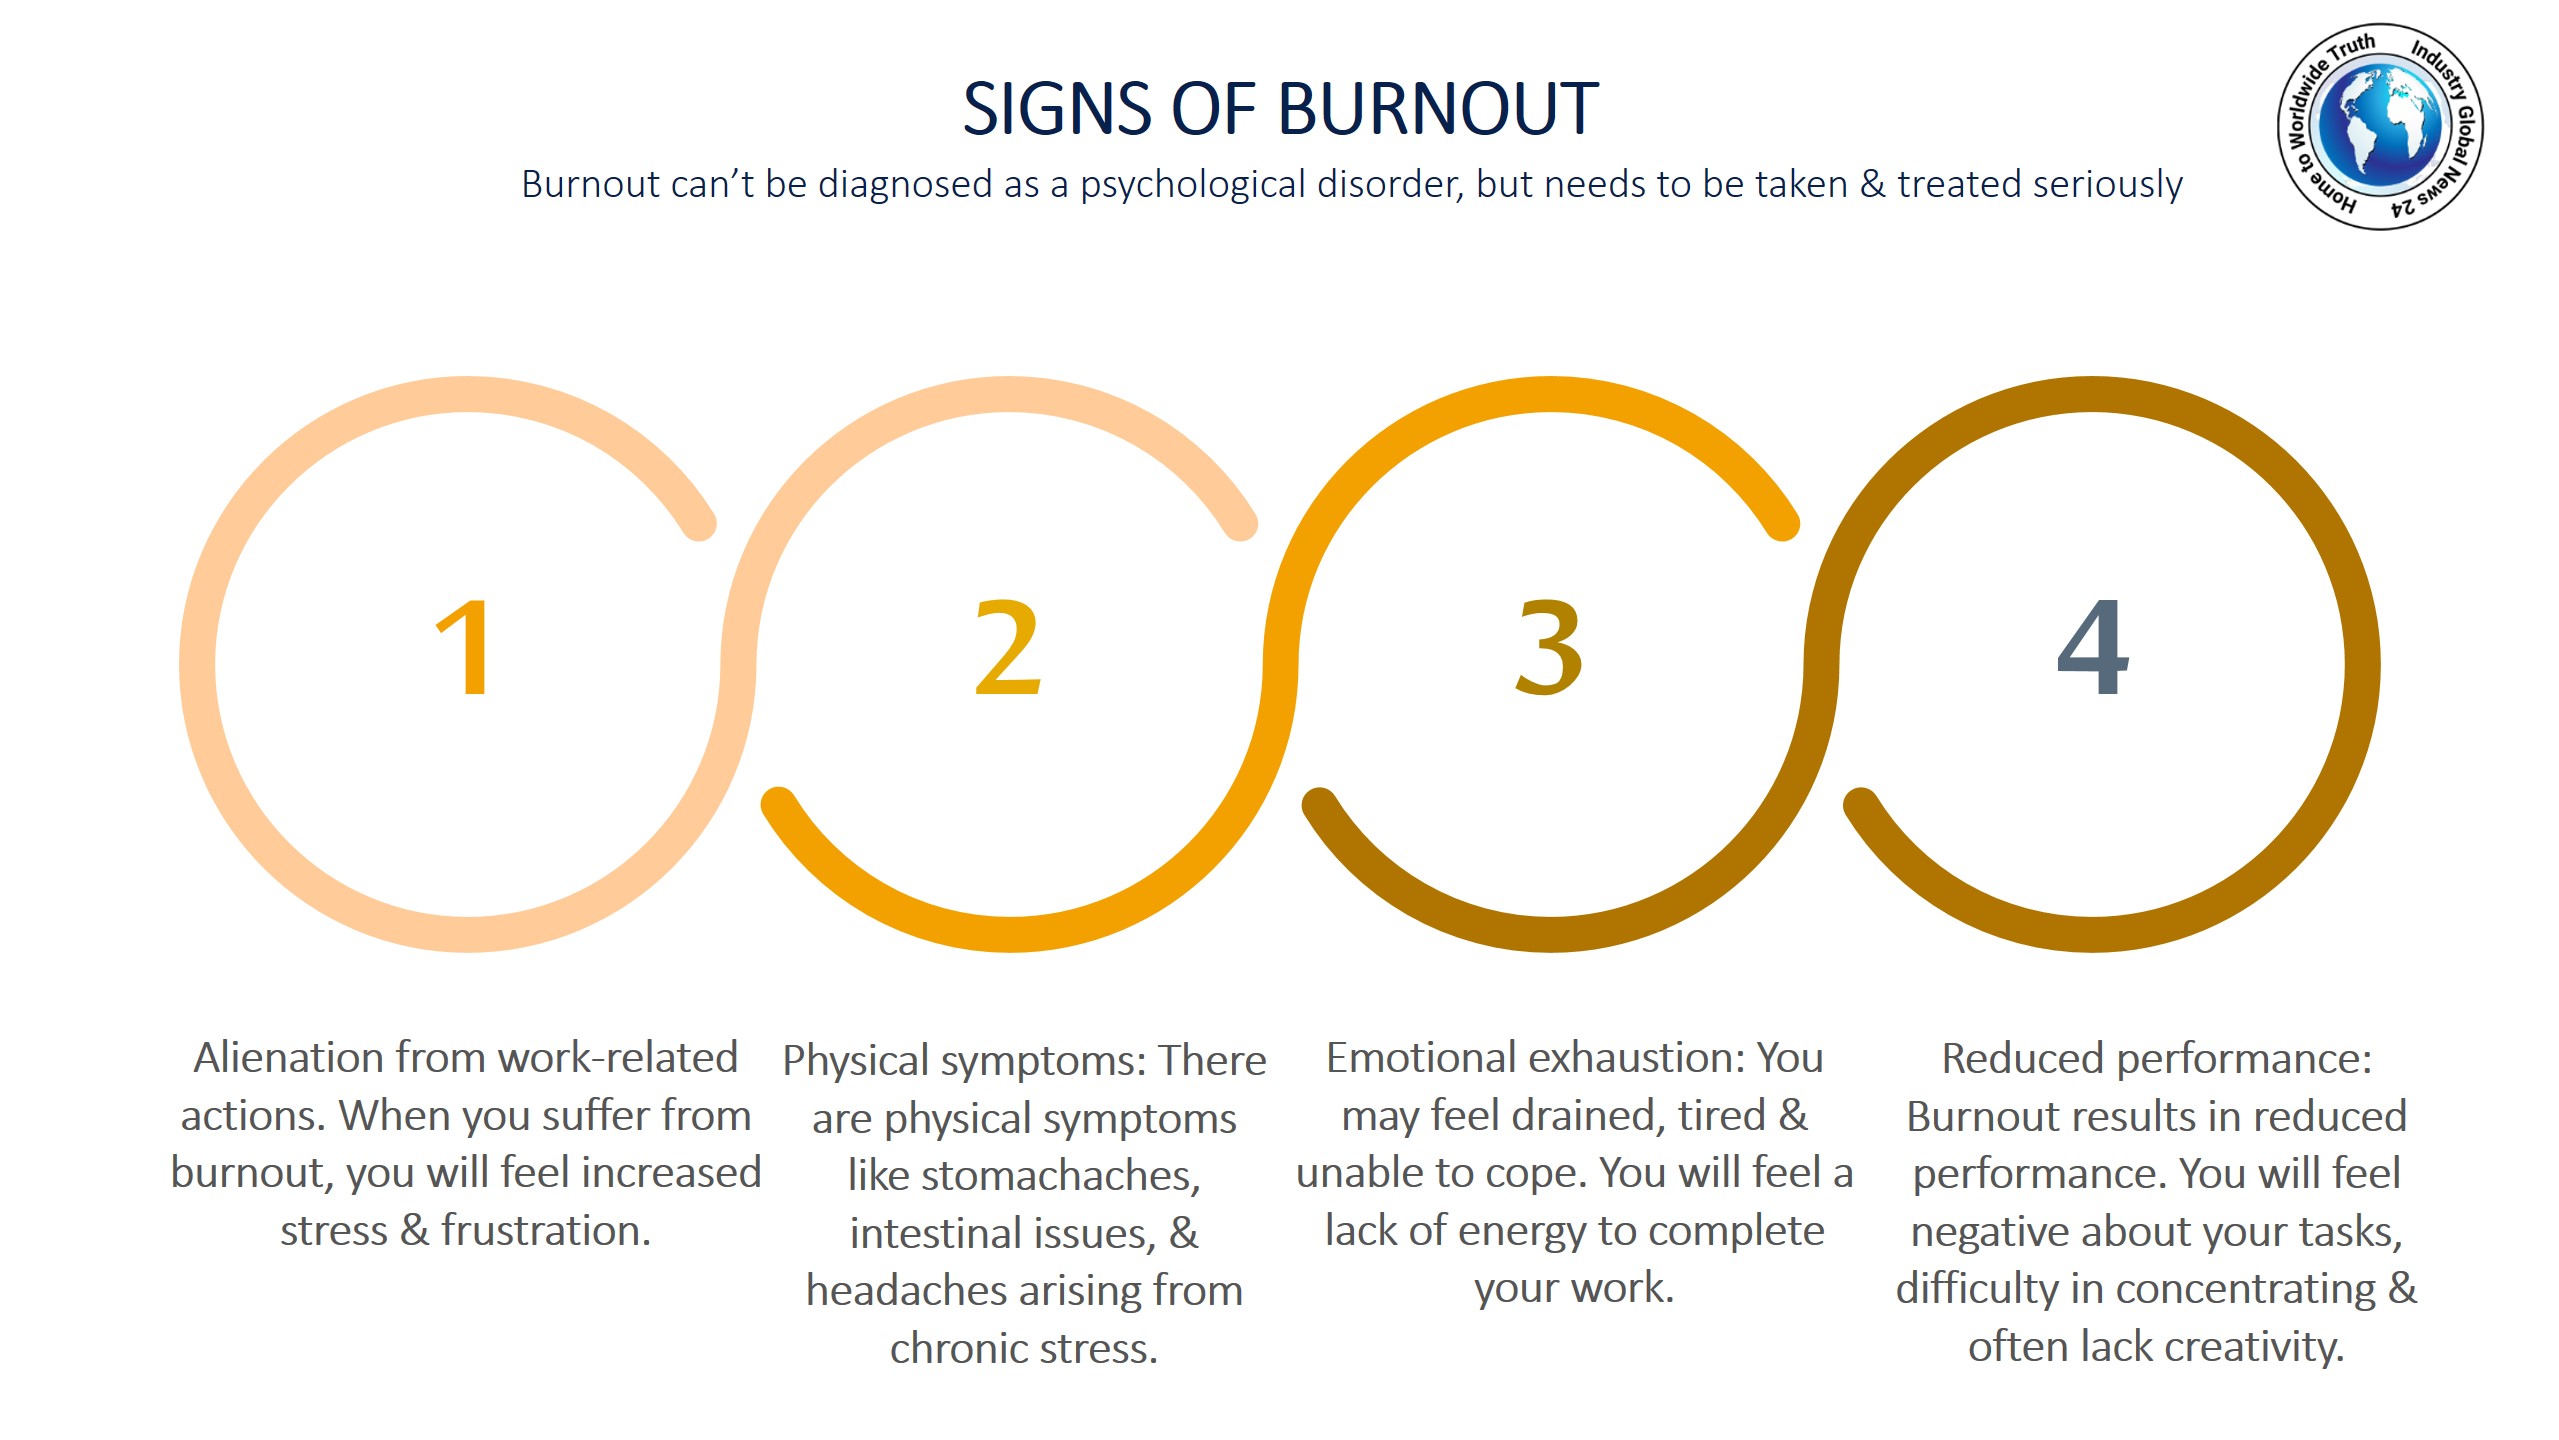 Signs of burnout